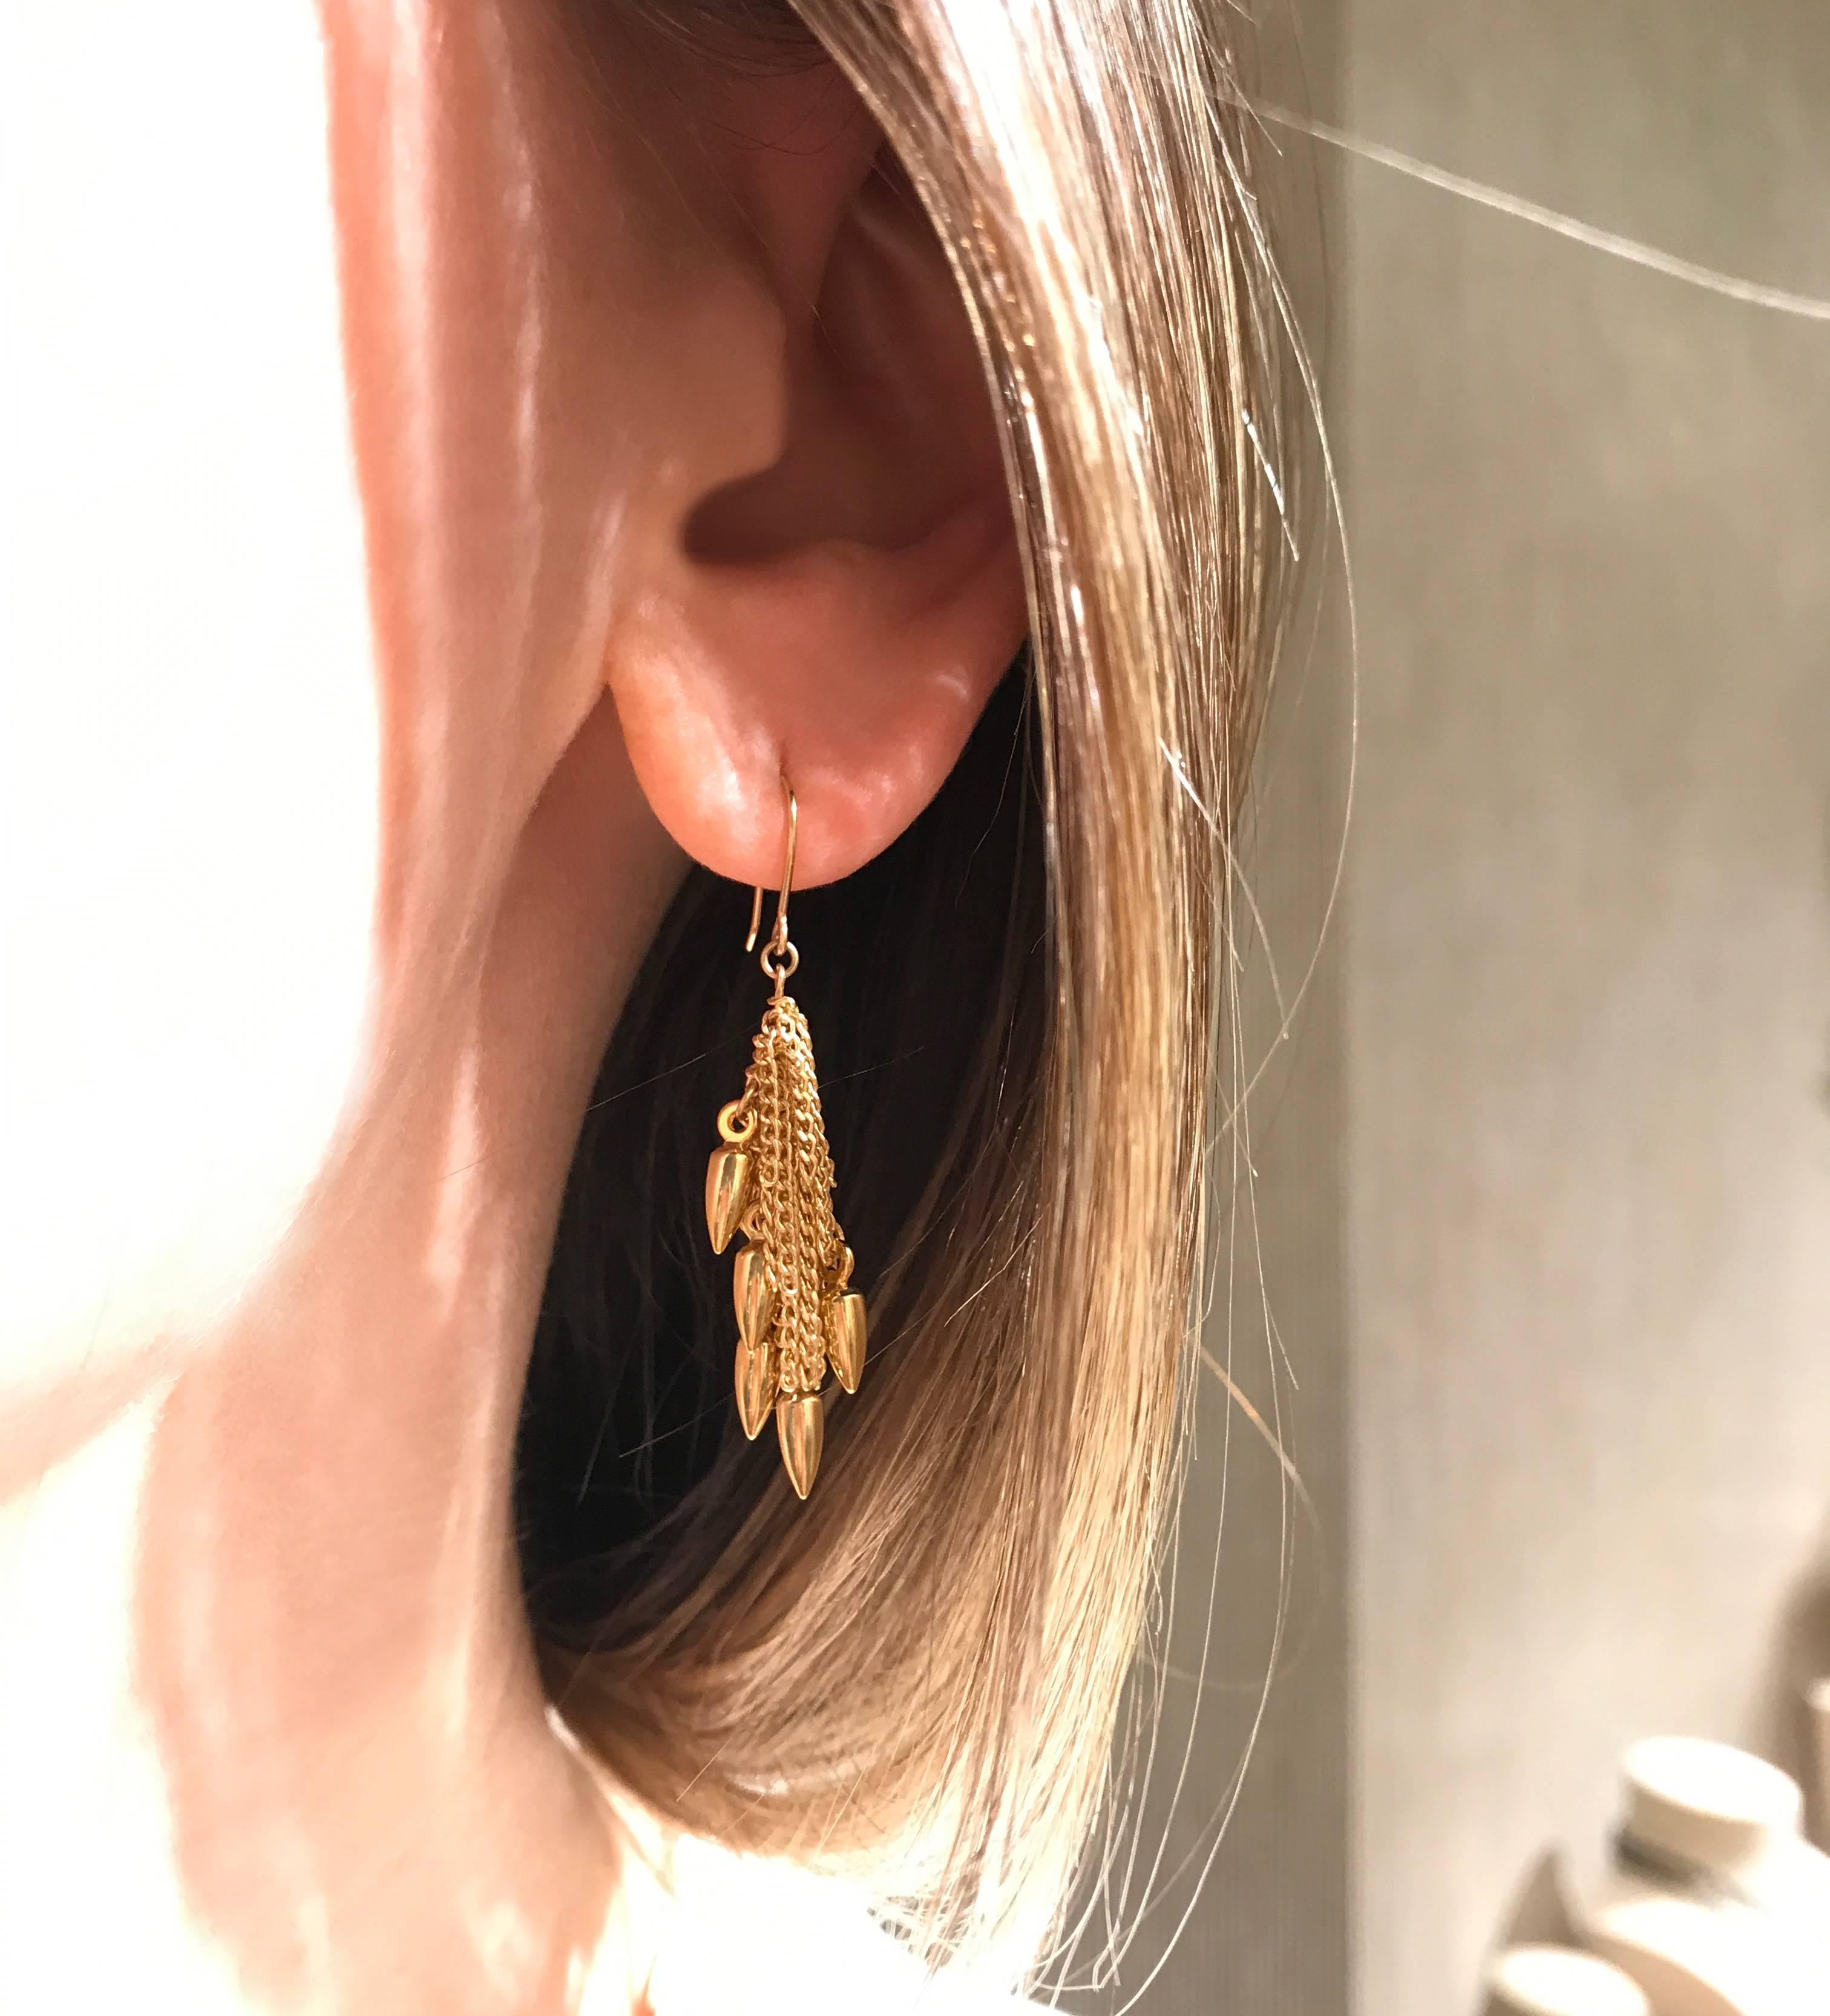 Bullet Cluster Earrings handmade by jewelry artist Estyn Hulbert with shiny gold-plated bullet beads, gold-filled chain, and 14k yellow gold ear wires.